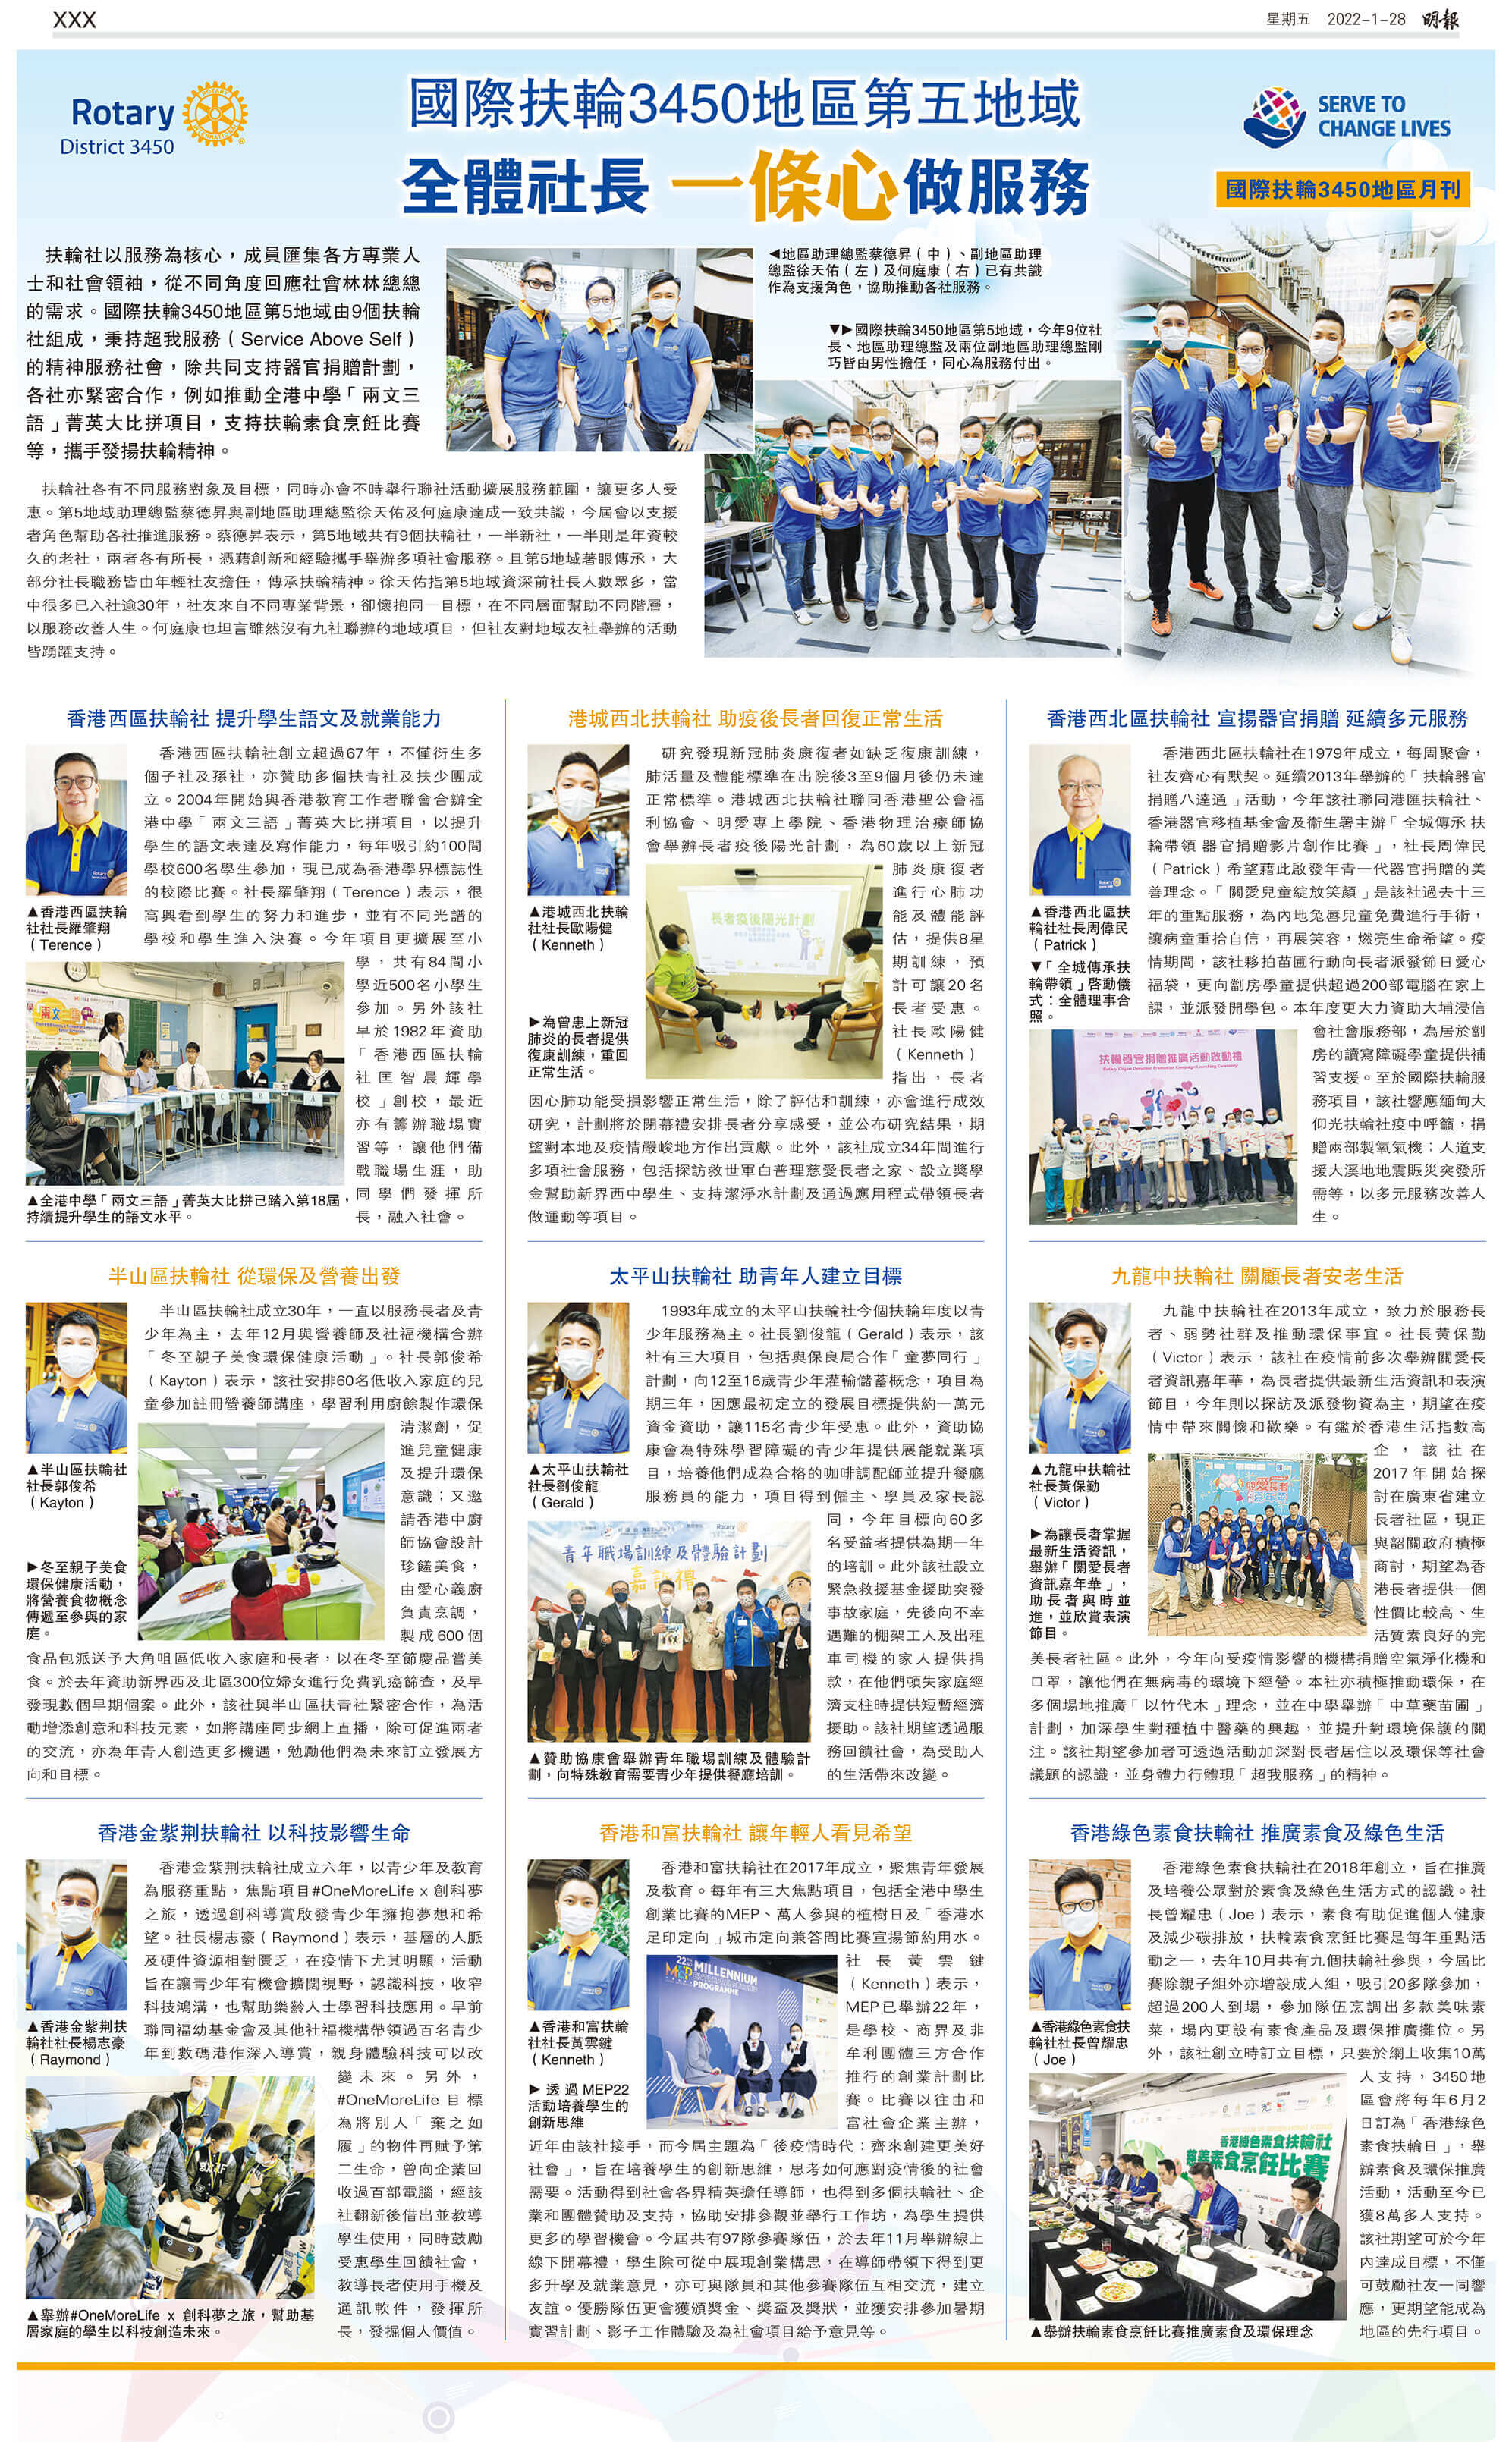 Area 5 Ming Pao interview